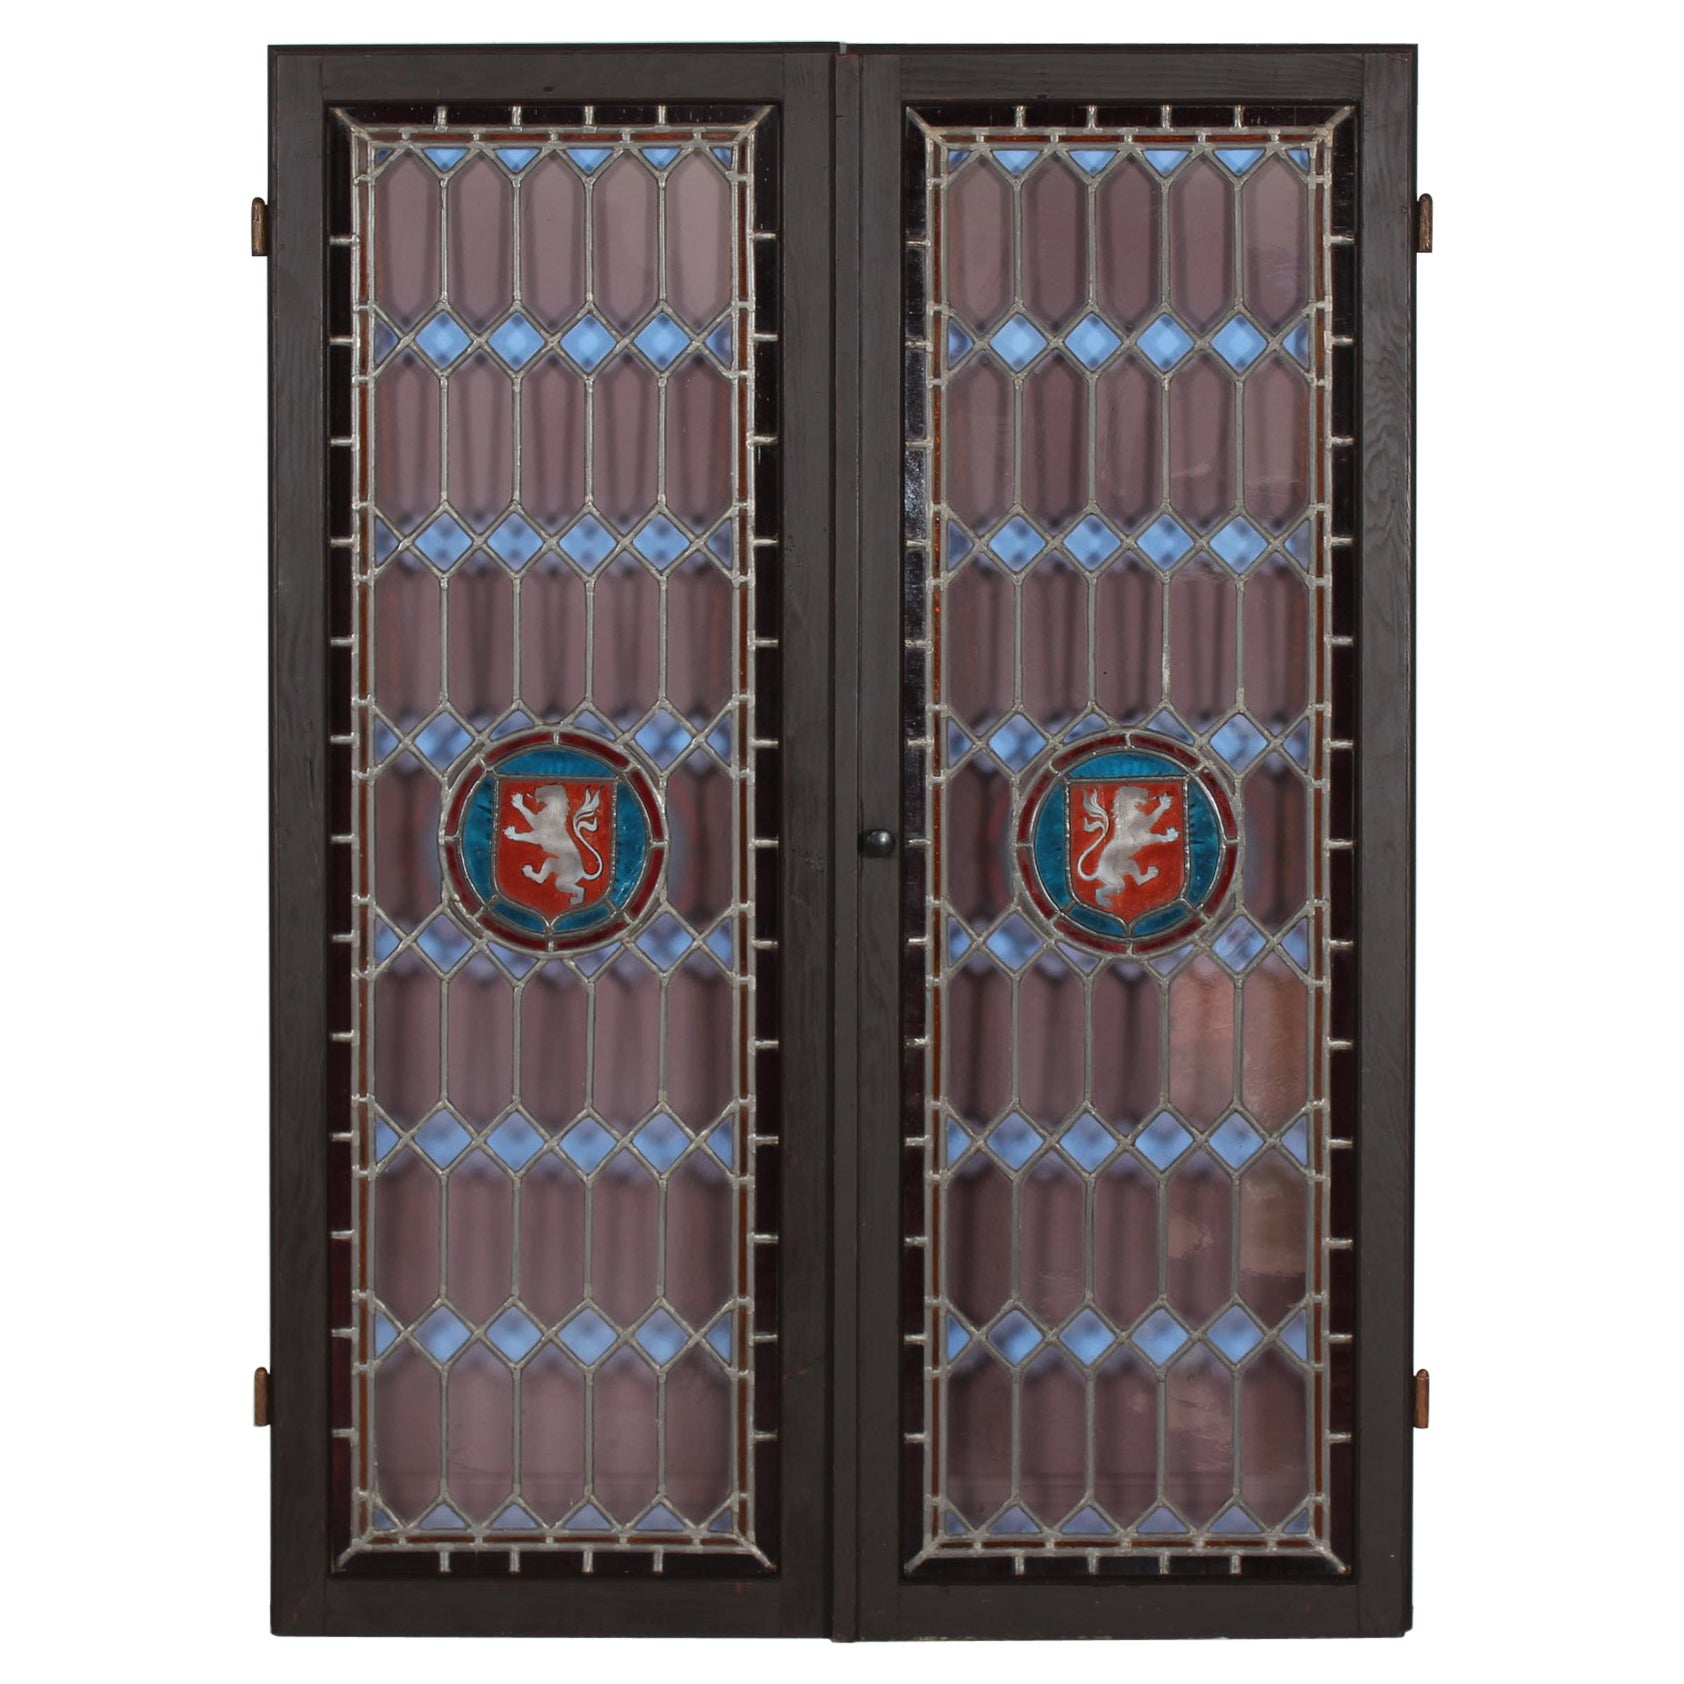 Set Old Leaded Windows with Colored Panes in Frame of Dark Wood, Denmark 1940s